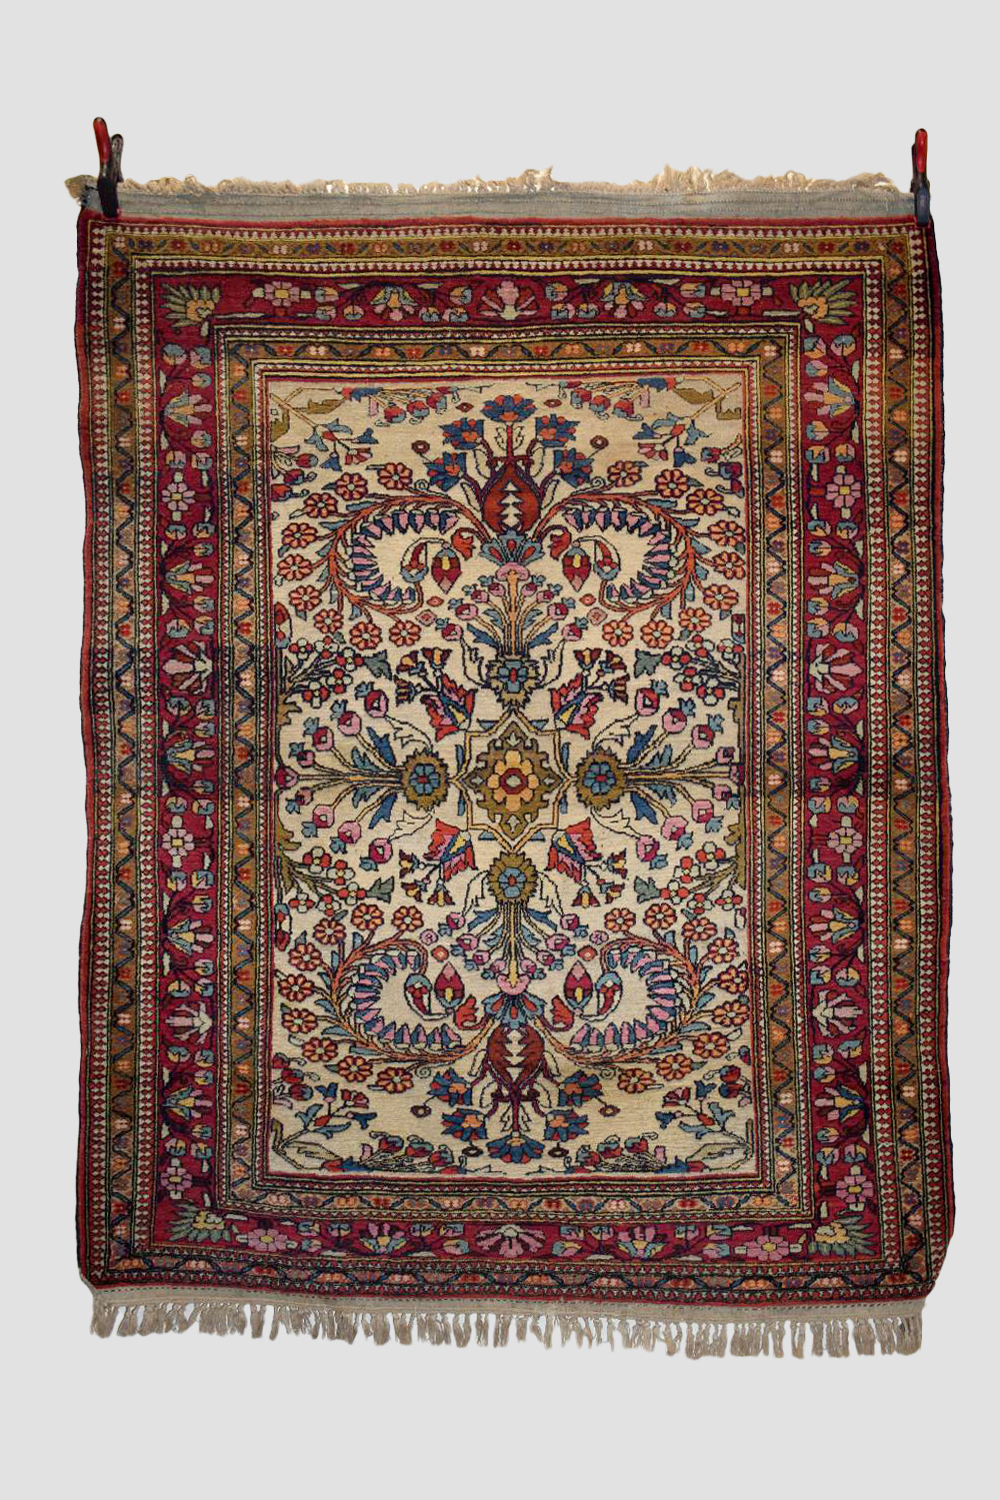 Esfahan rug, central Persia, circa 1930s, 6ft. 6in. x 5ft. 3in. 1.98m. x 1.60m. Very light surface